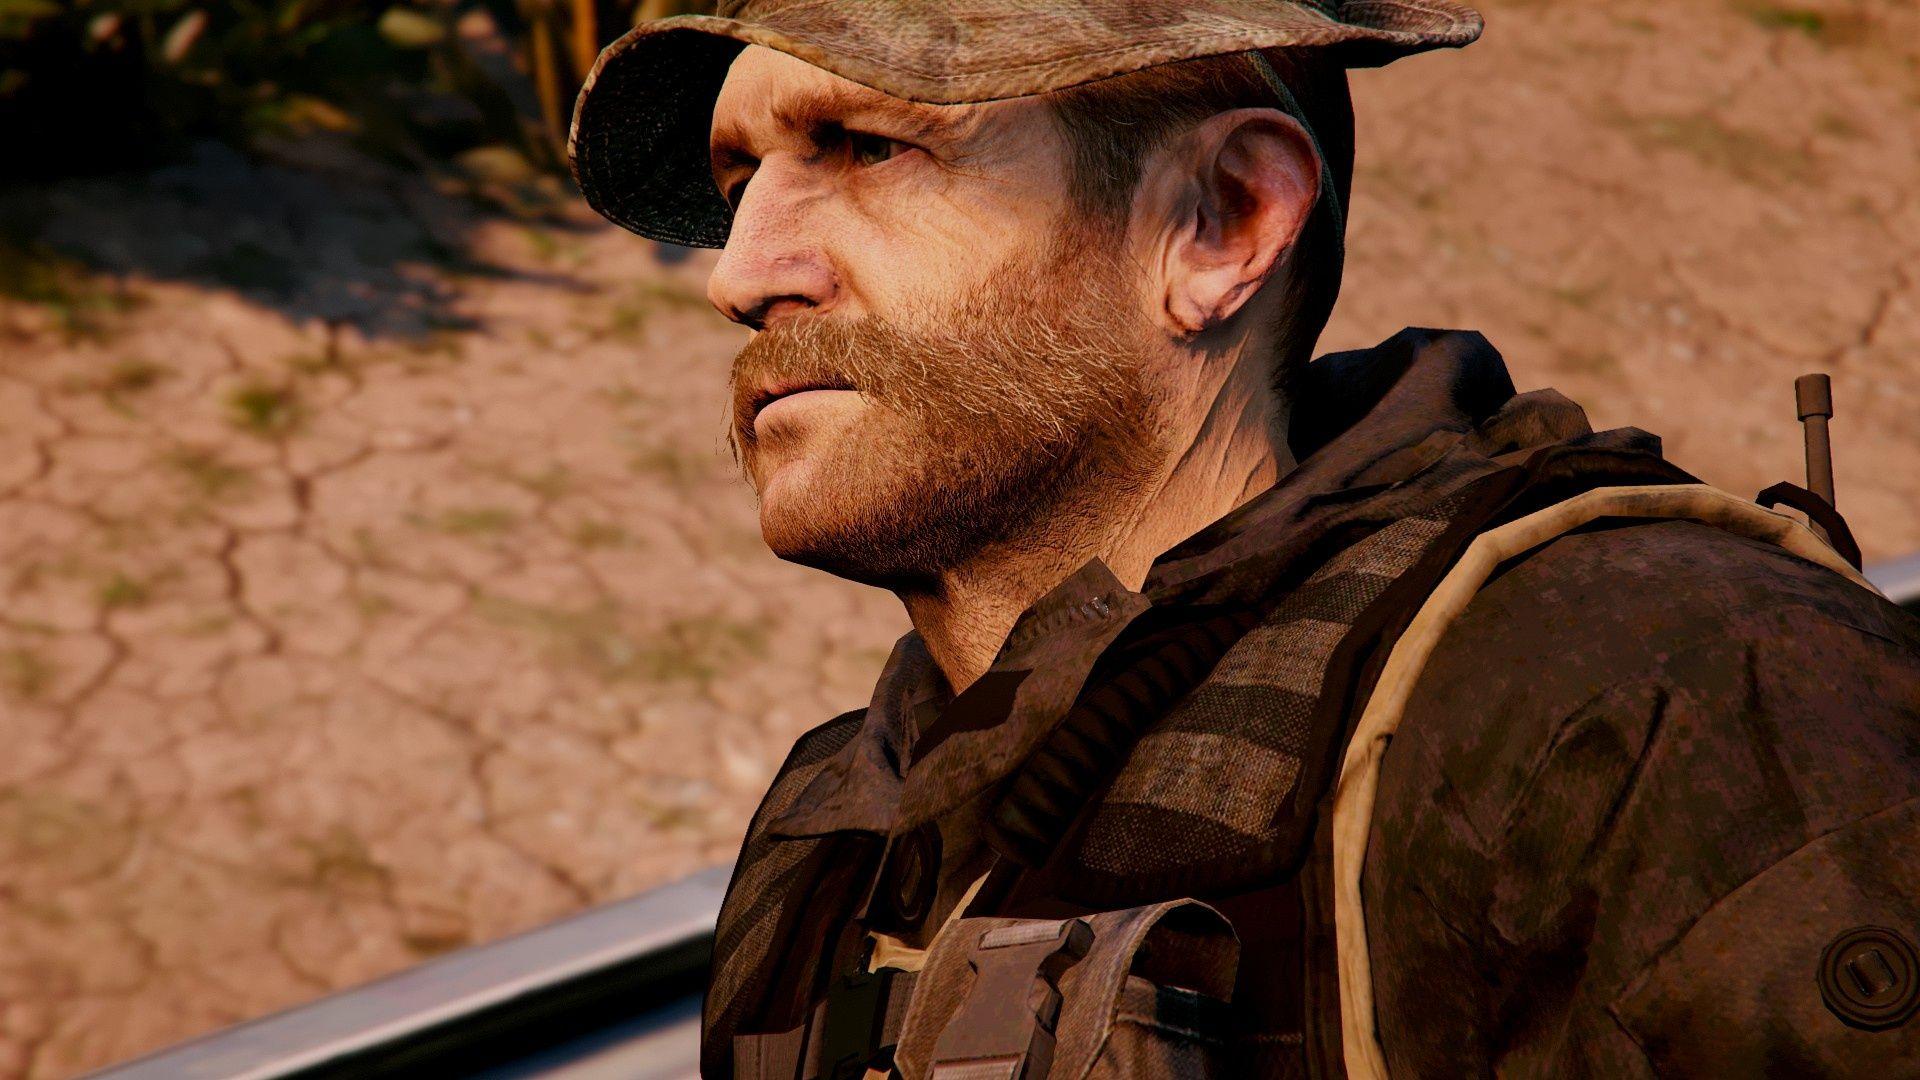 Cpt. Price From CoD 4 Remastered [Add On / Replace]